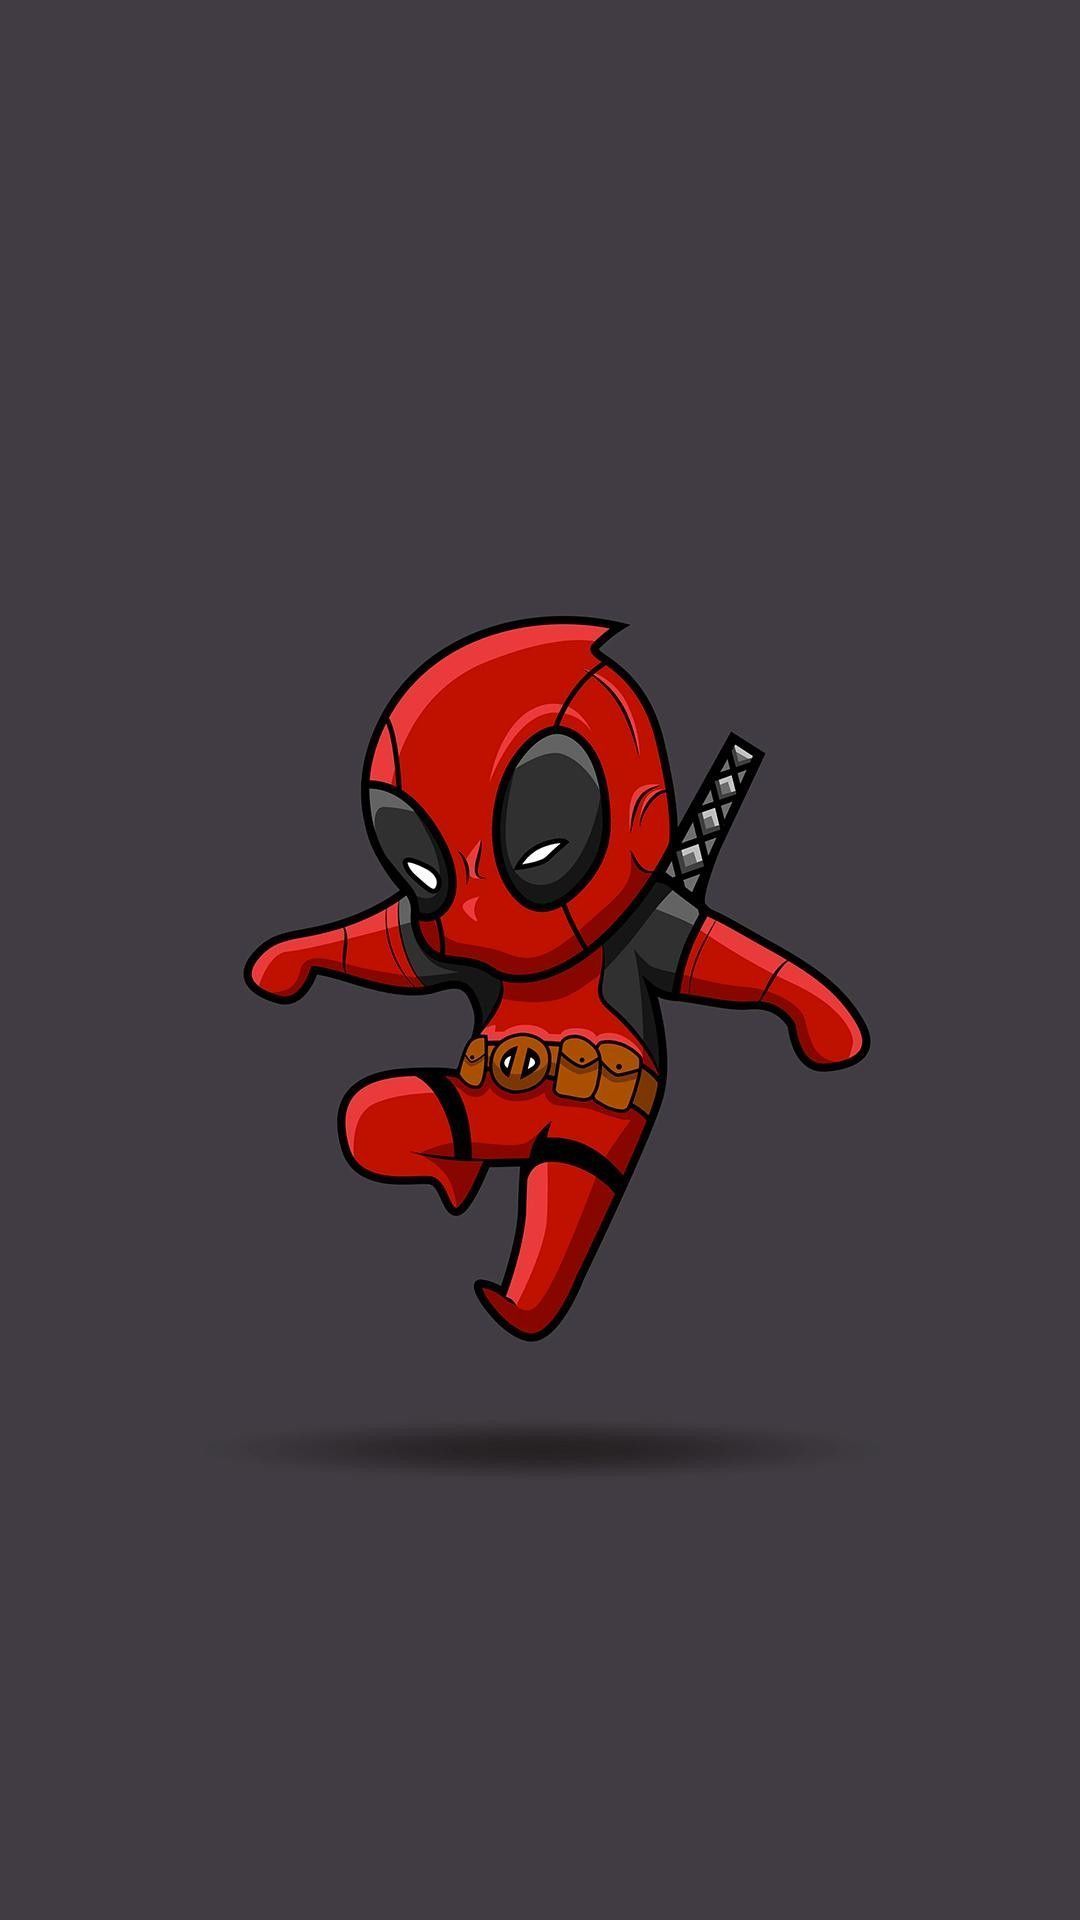 Marvel Wallpaper for iPhone from Uploaded by user. Deadpool wallpaper, Marvel wallpaper, Marvel comics wallpaper